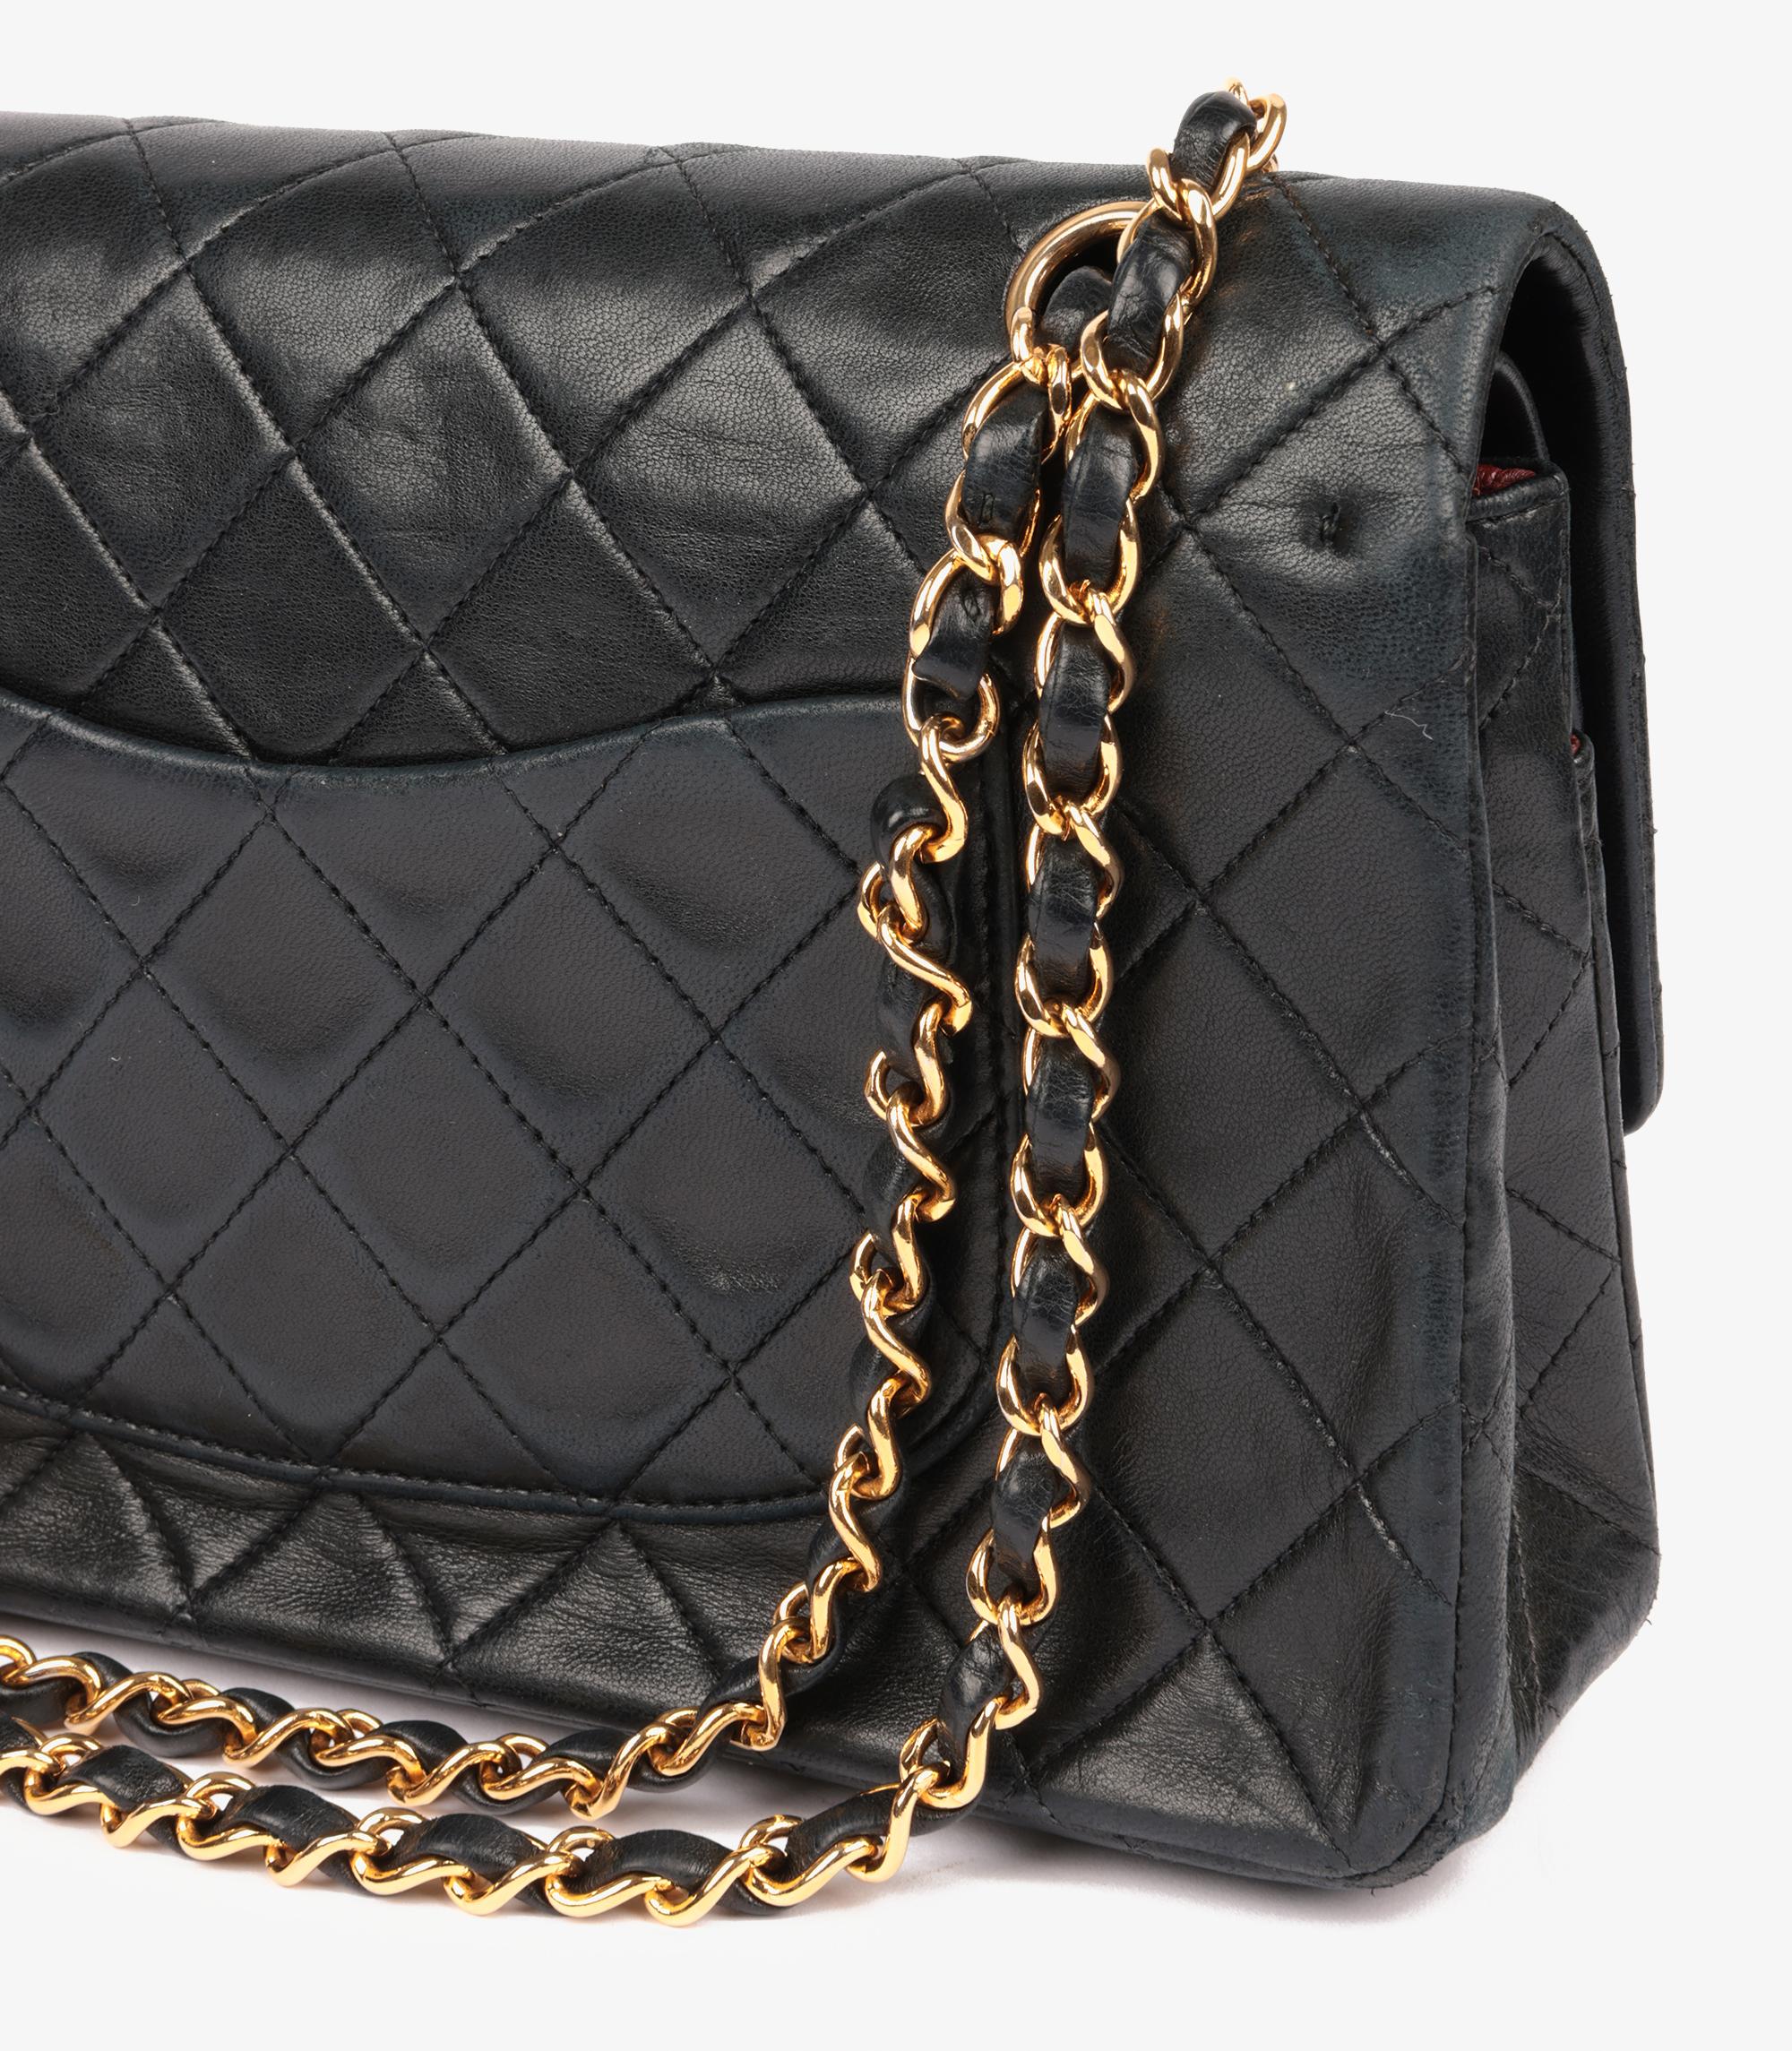 Chanel Black Quilted Lambskin Vintage Medium Classic Double Flap Bag 5